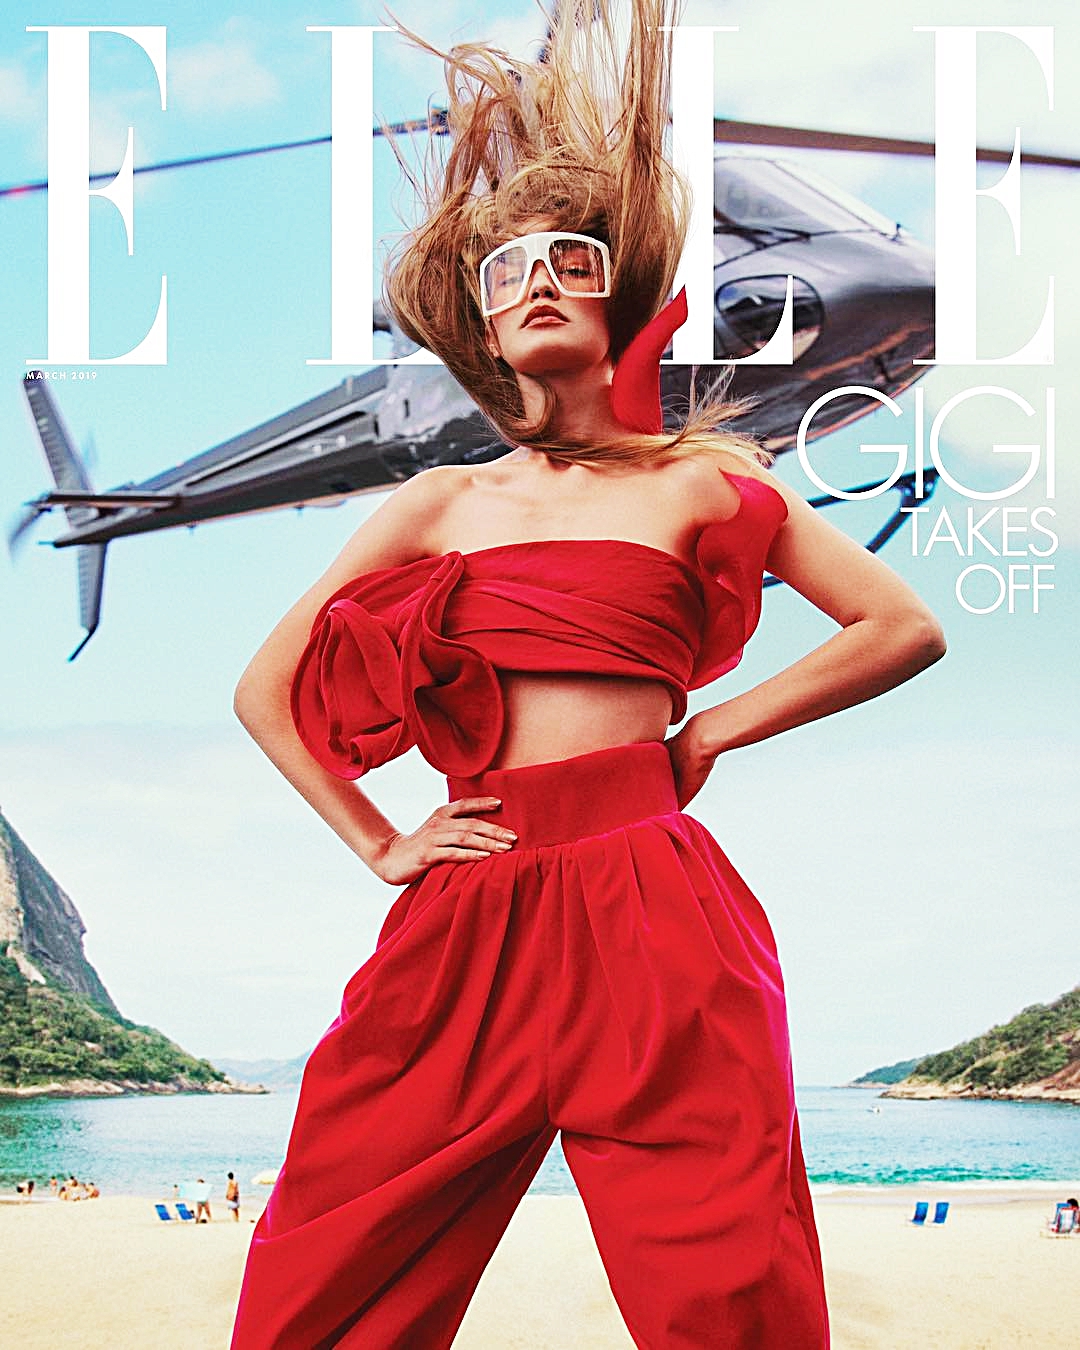 Elle Us March 2019 Cover Story Editorial